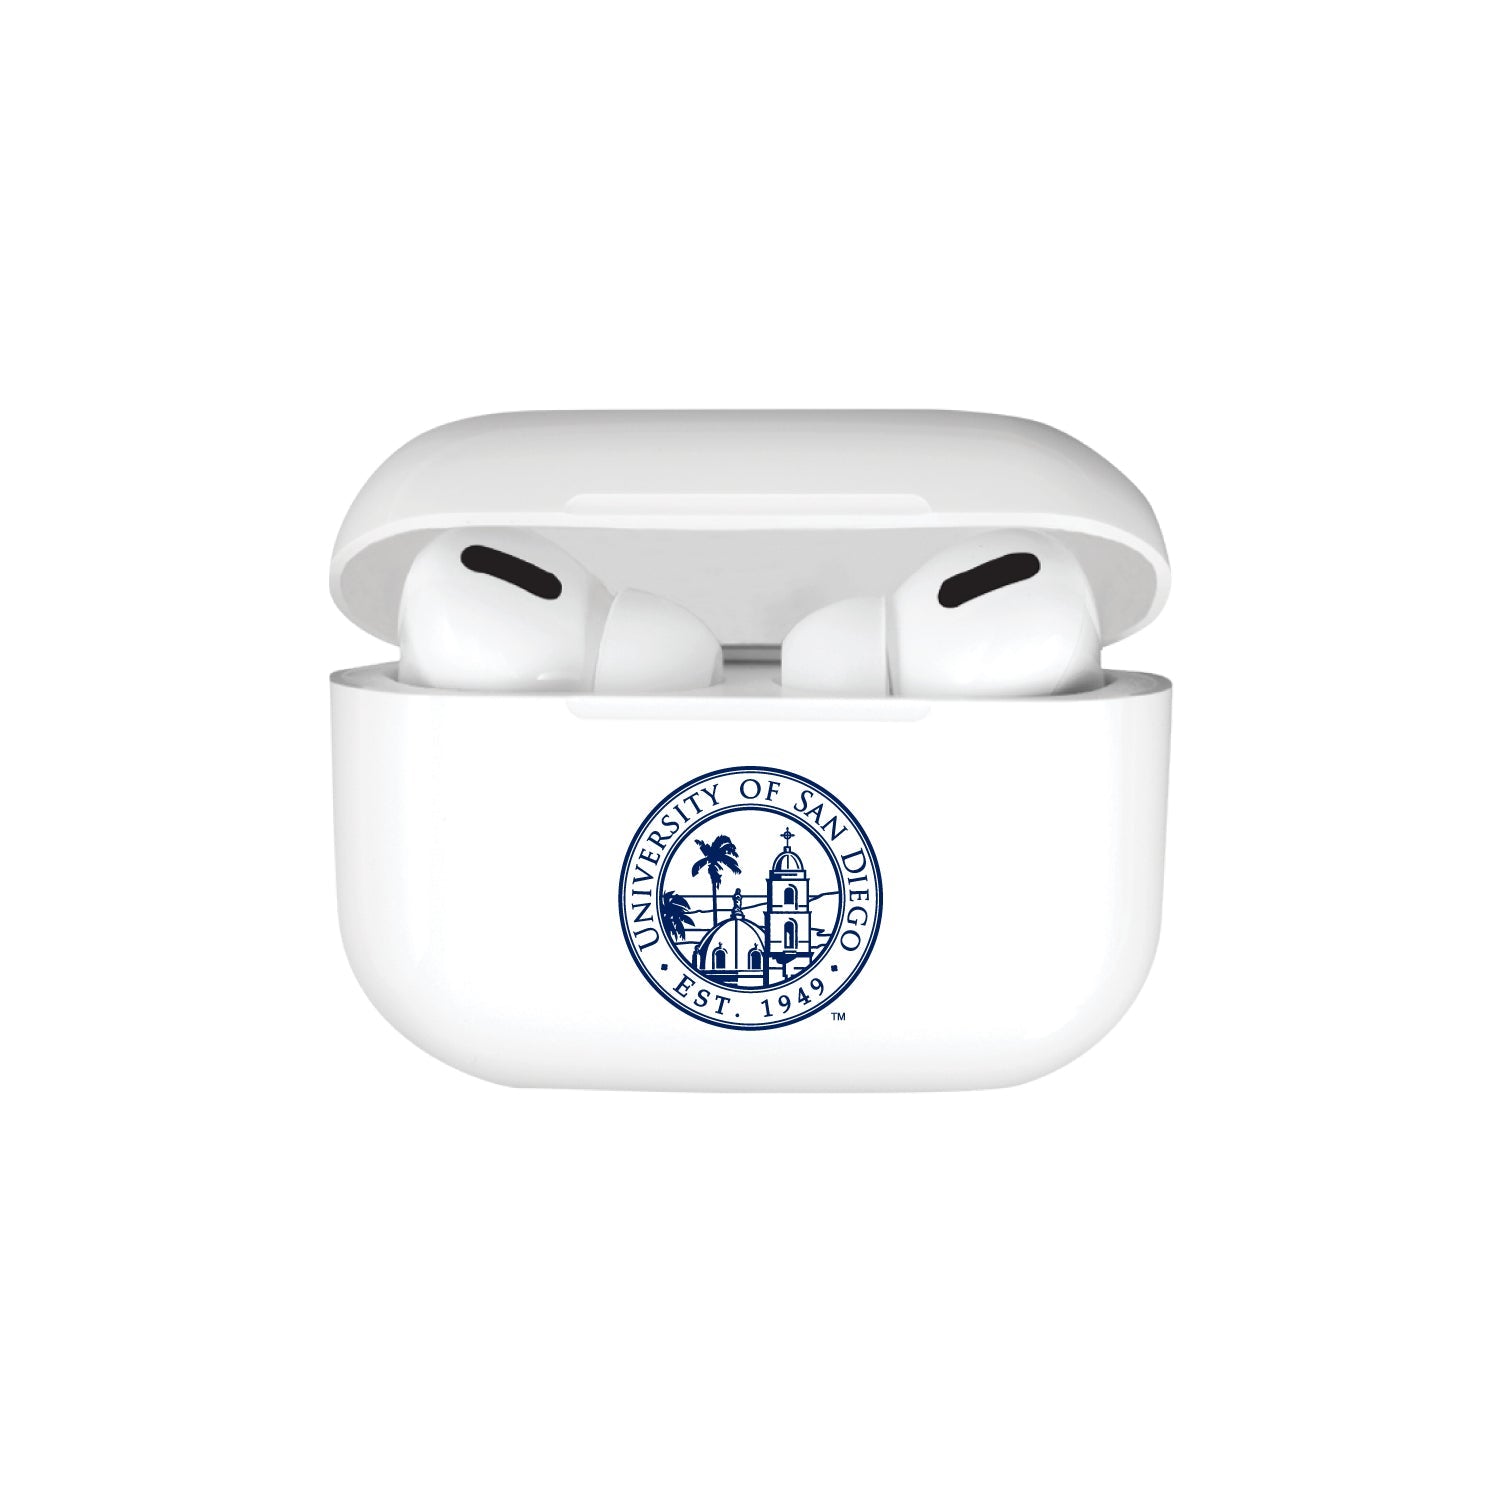 University of San Diego TPU Airpods Case